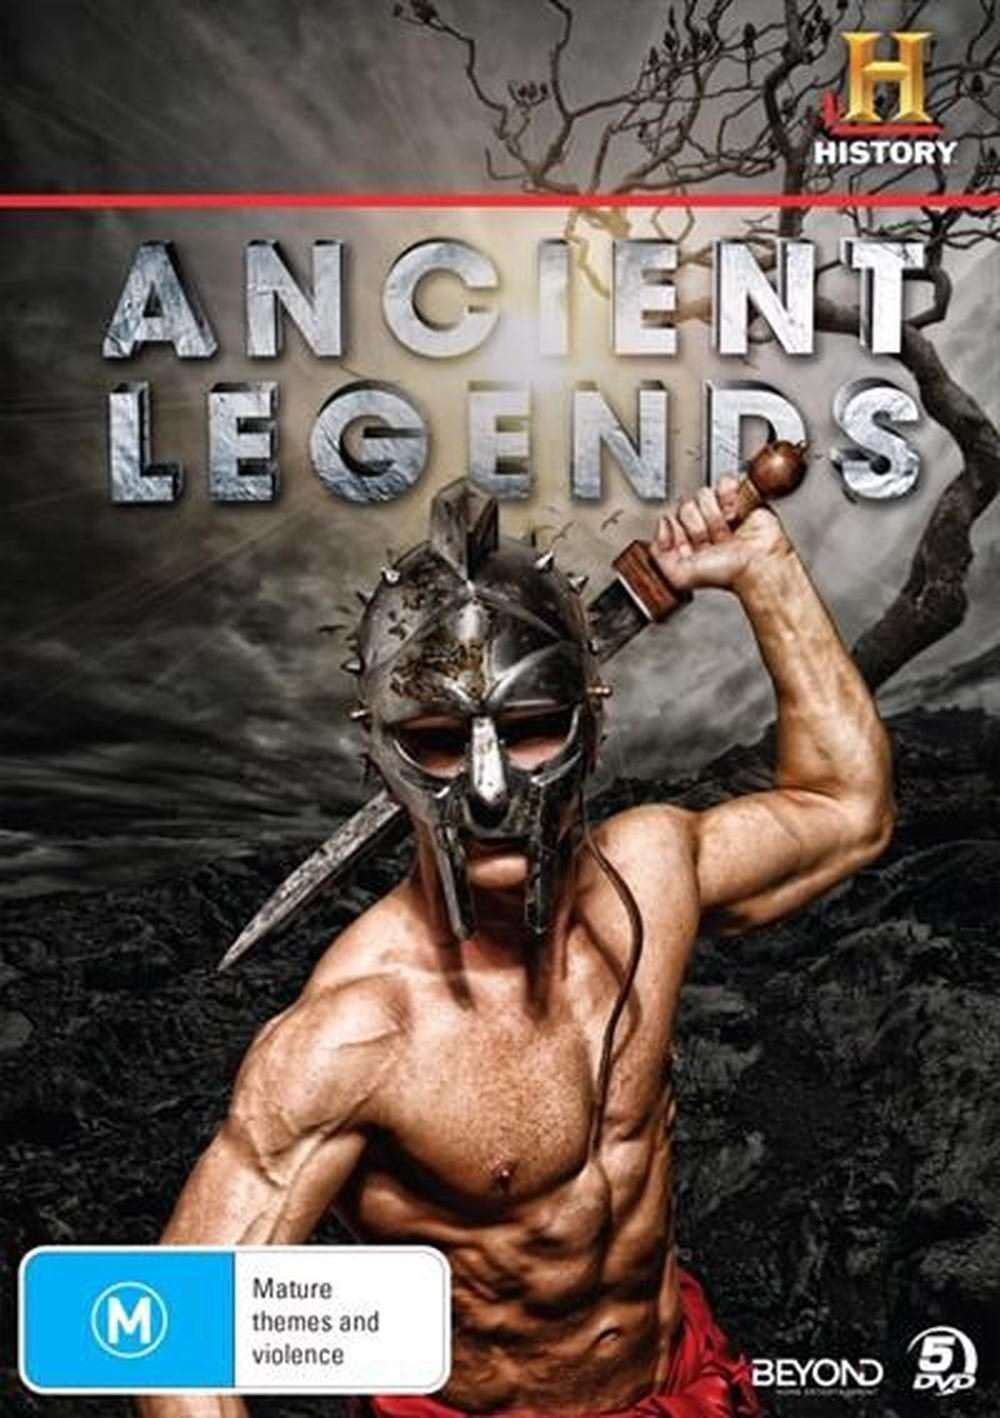 Ancient Legends History Channel